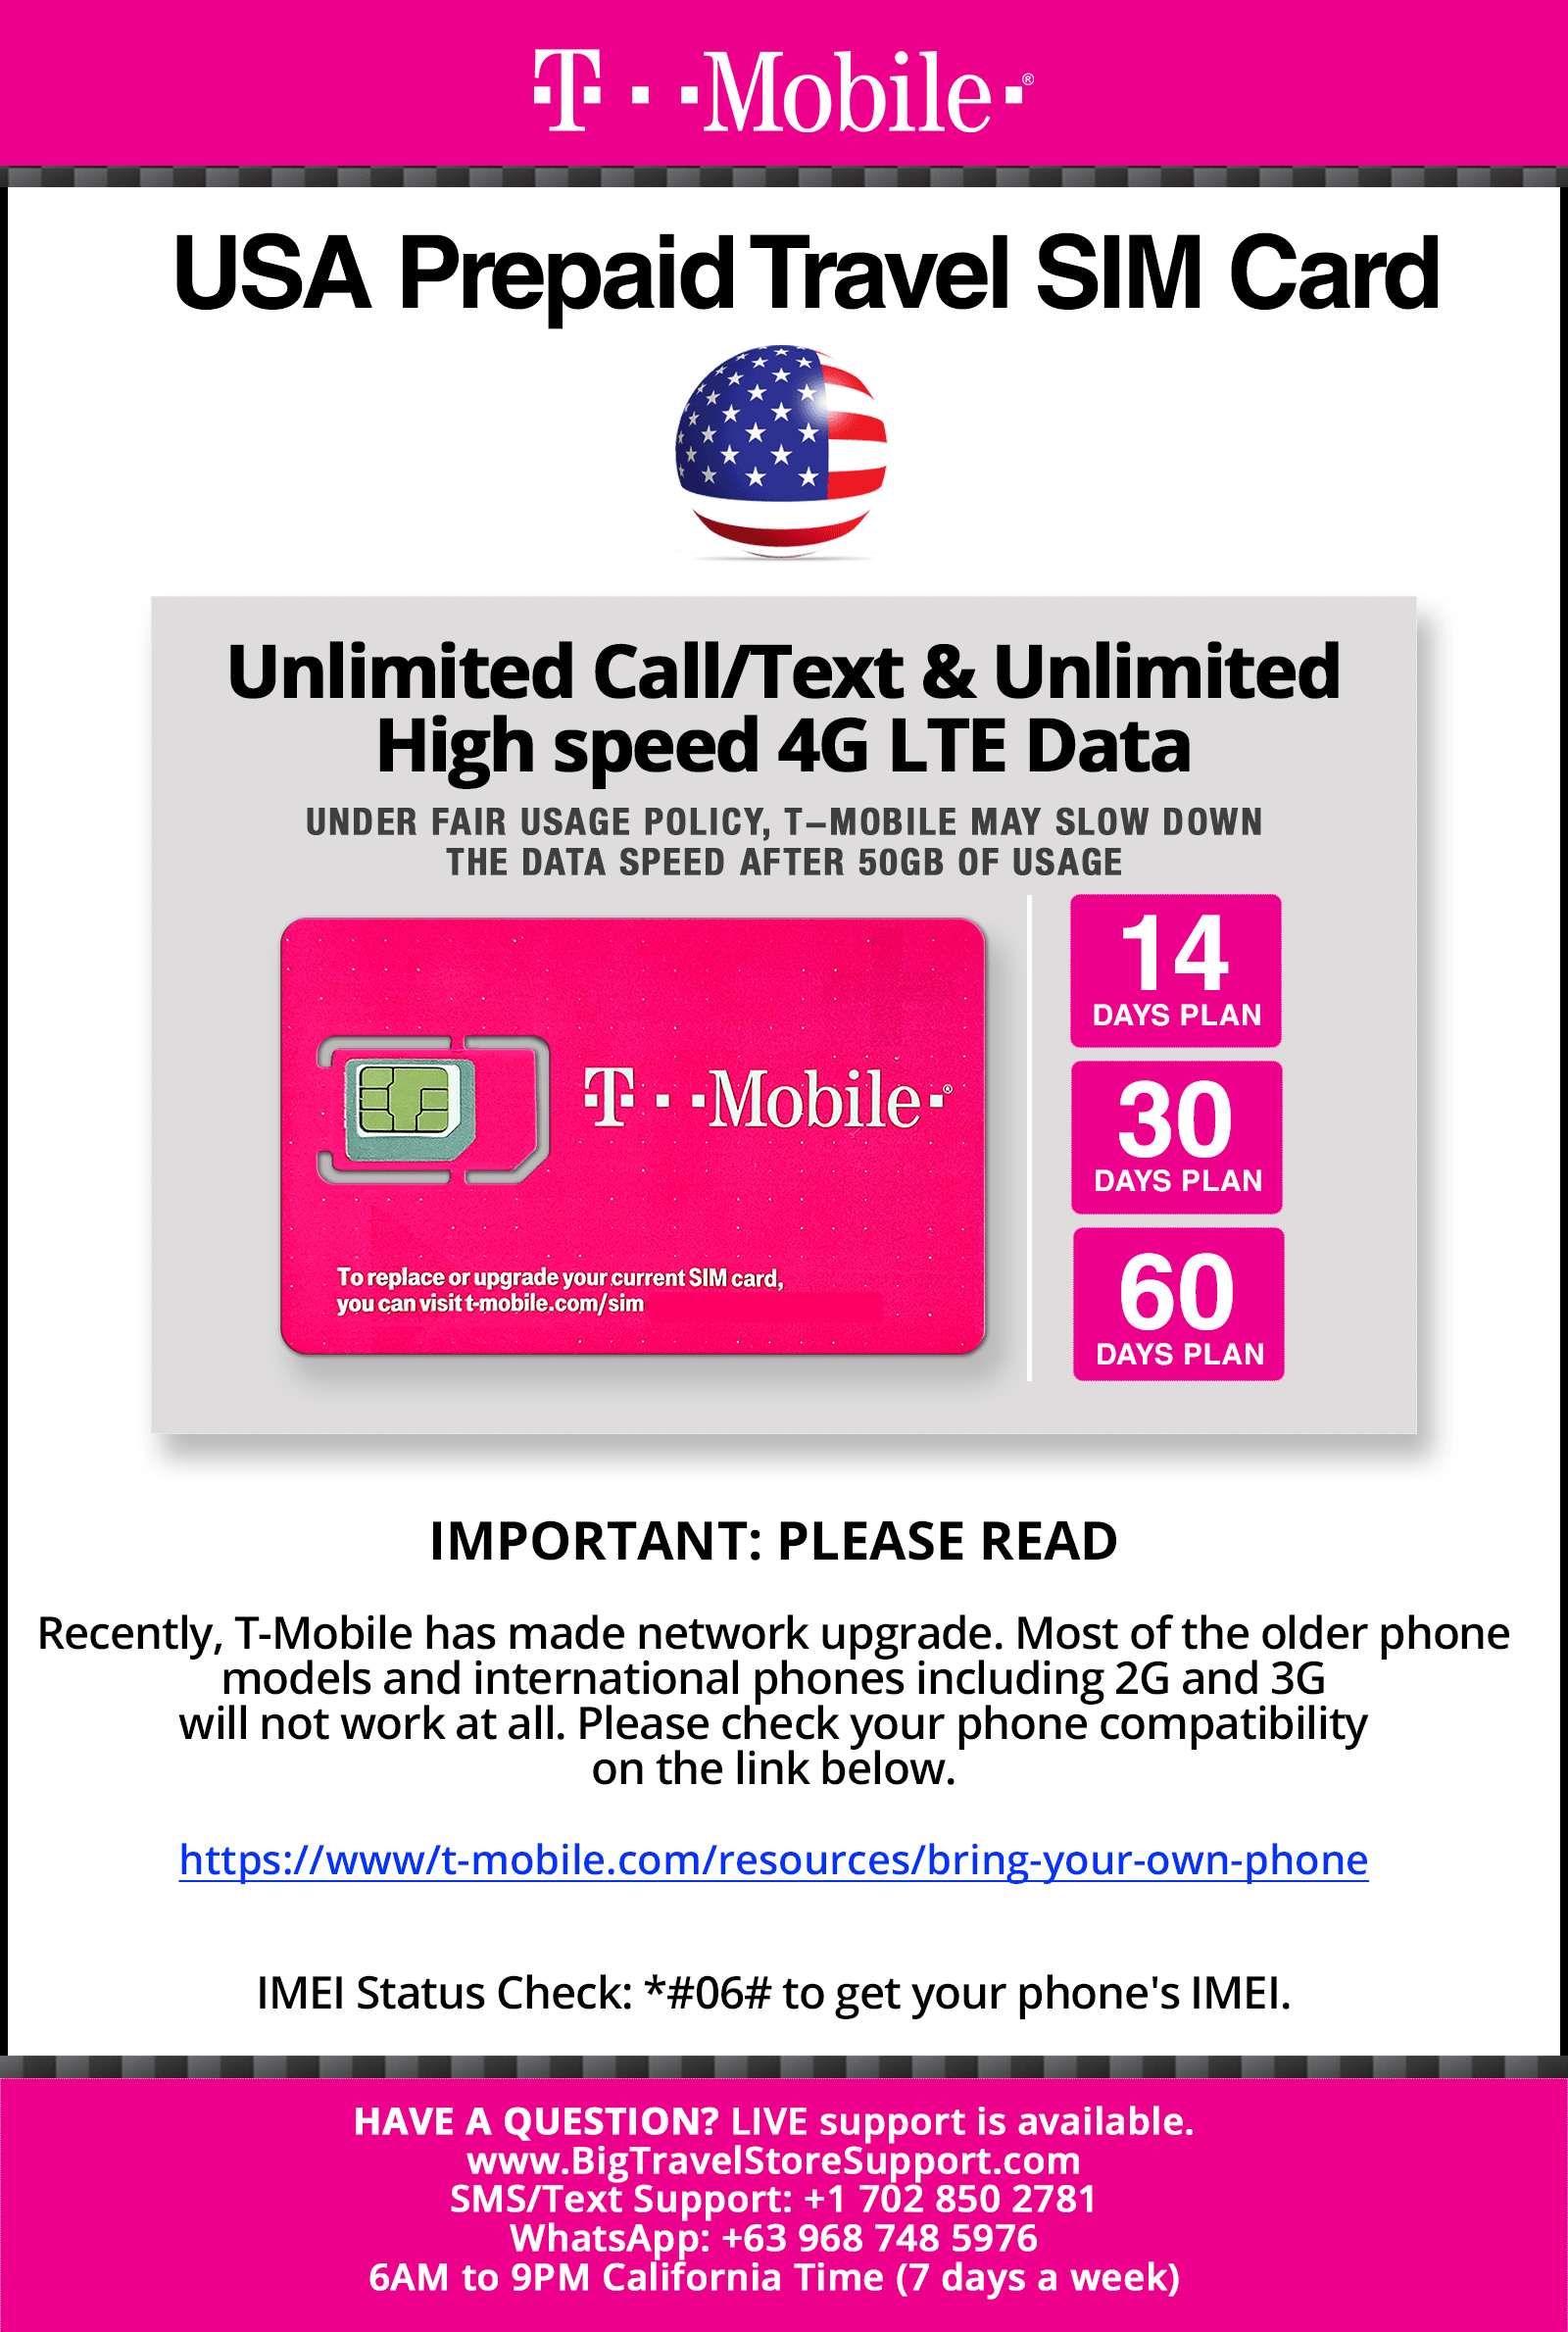 Prepaid SIM Card | 2GB 30-Day 4G LTE - USA Compatible with AT&T and  T-Mobile Networks for Unlocked IoT Device(NOT for Voice/Text Service. for  Data Use